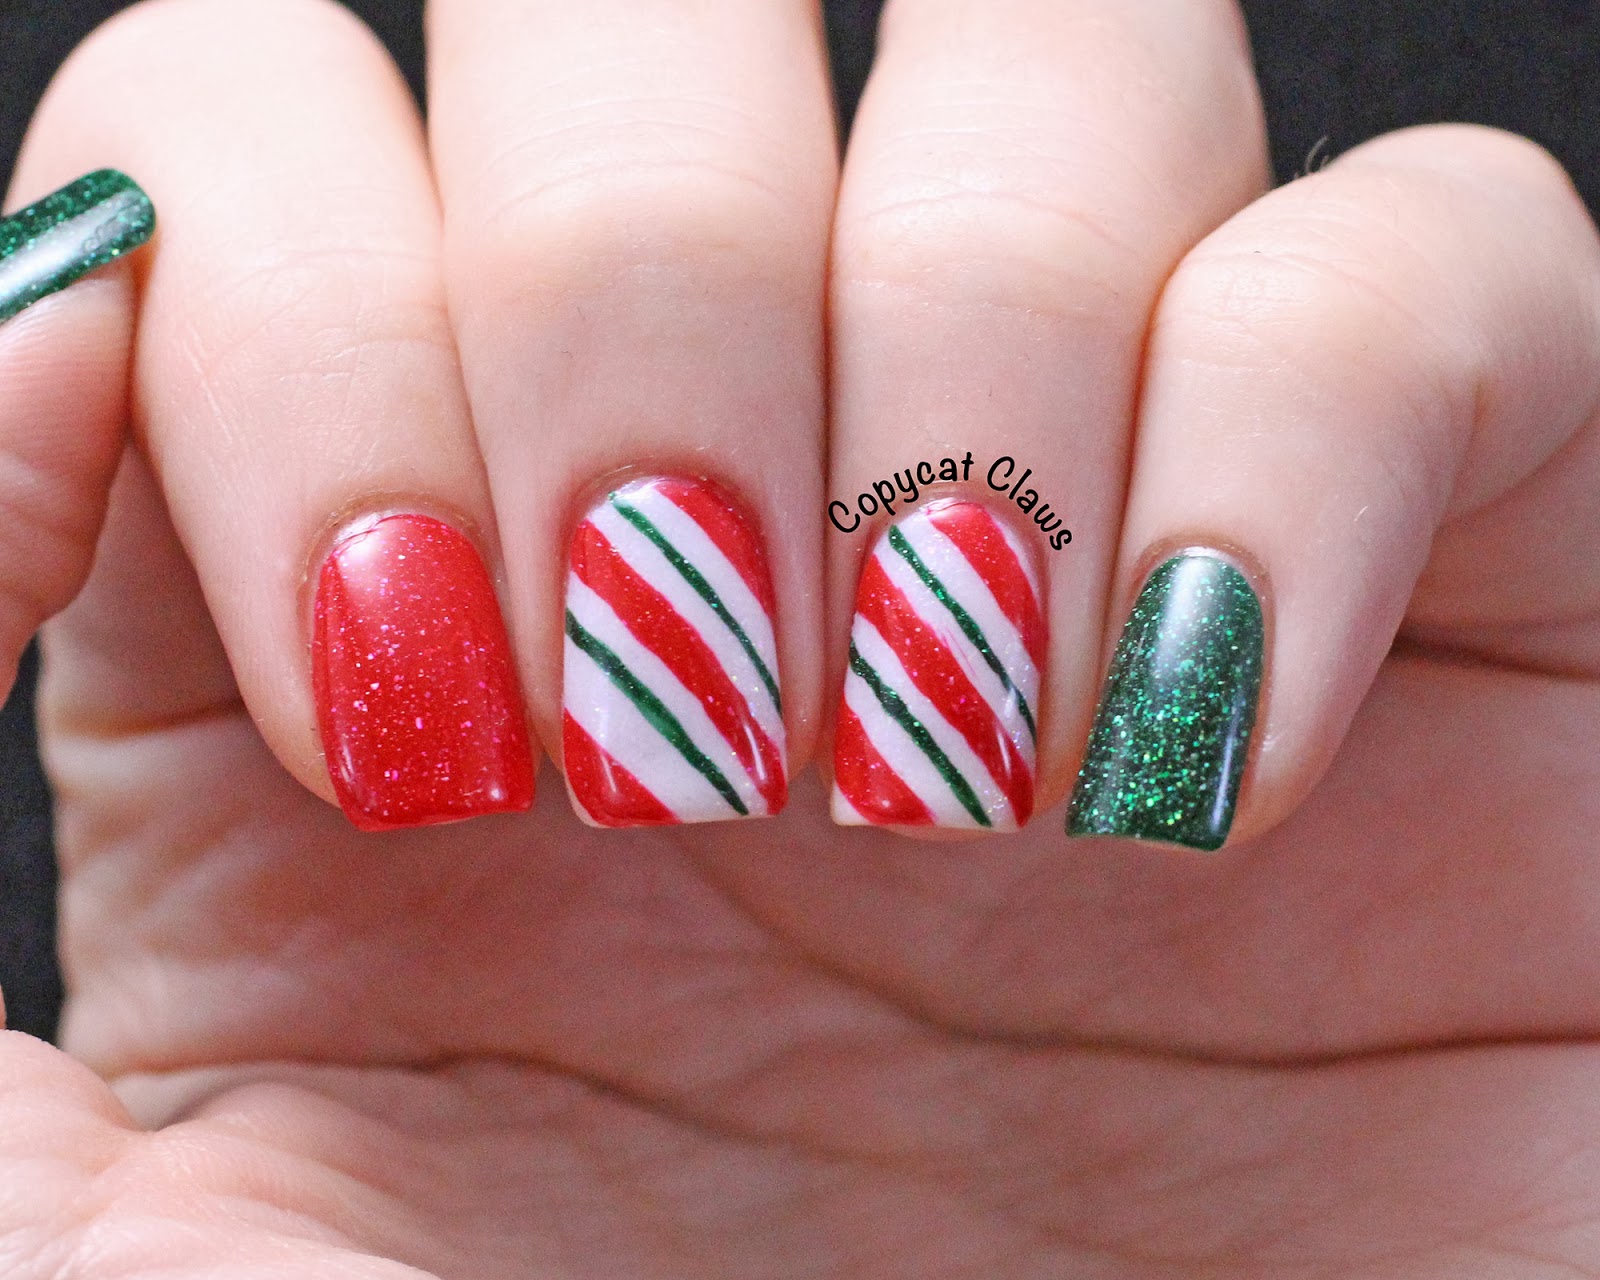 10. Candy Cane Solar Nail Designs for Christmas - wide 9